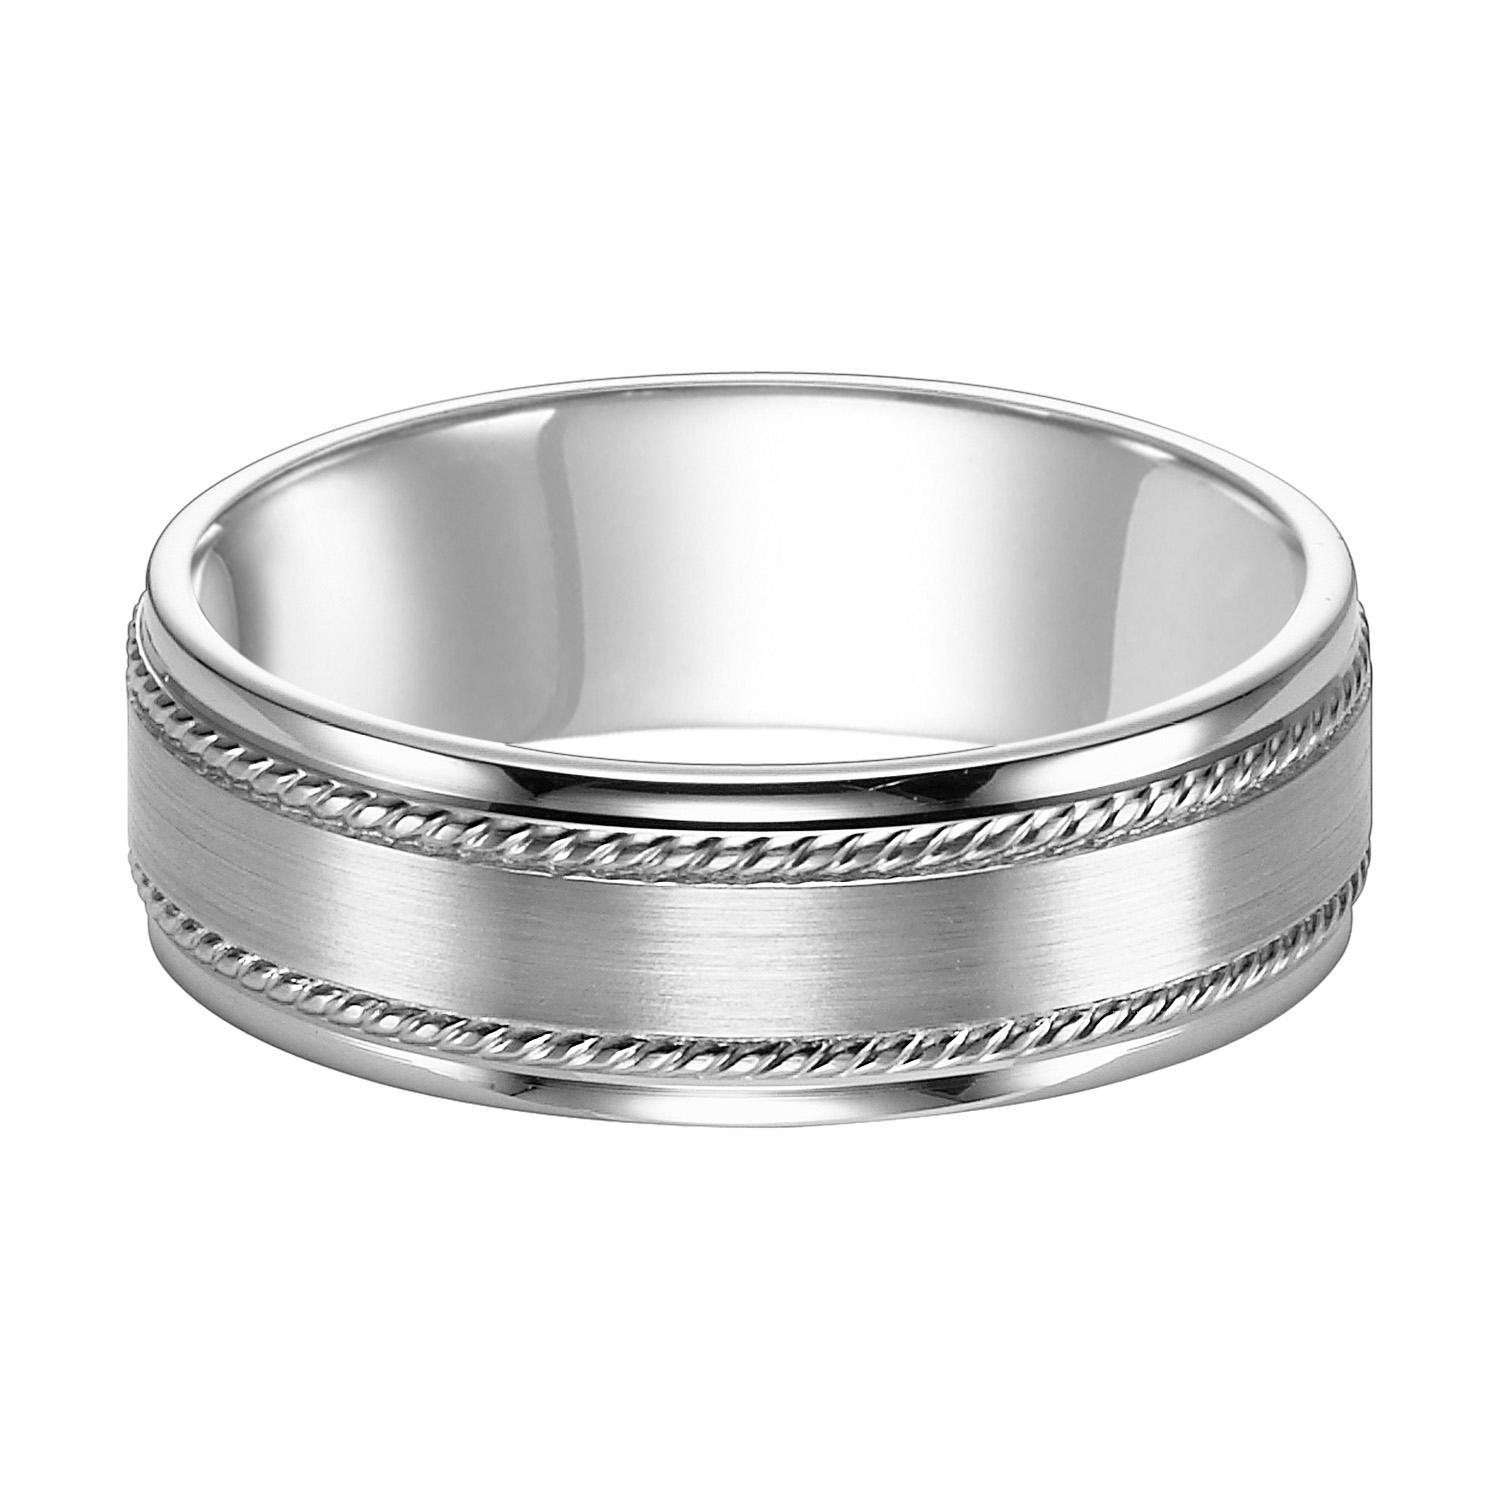 Gents 14K White Gold Wedding Band with Rope Design